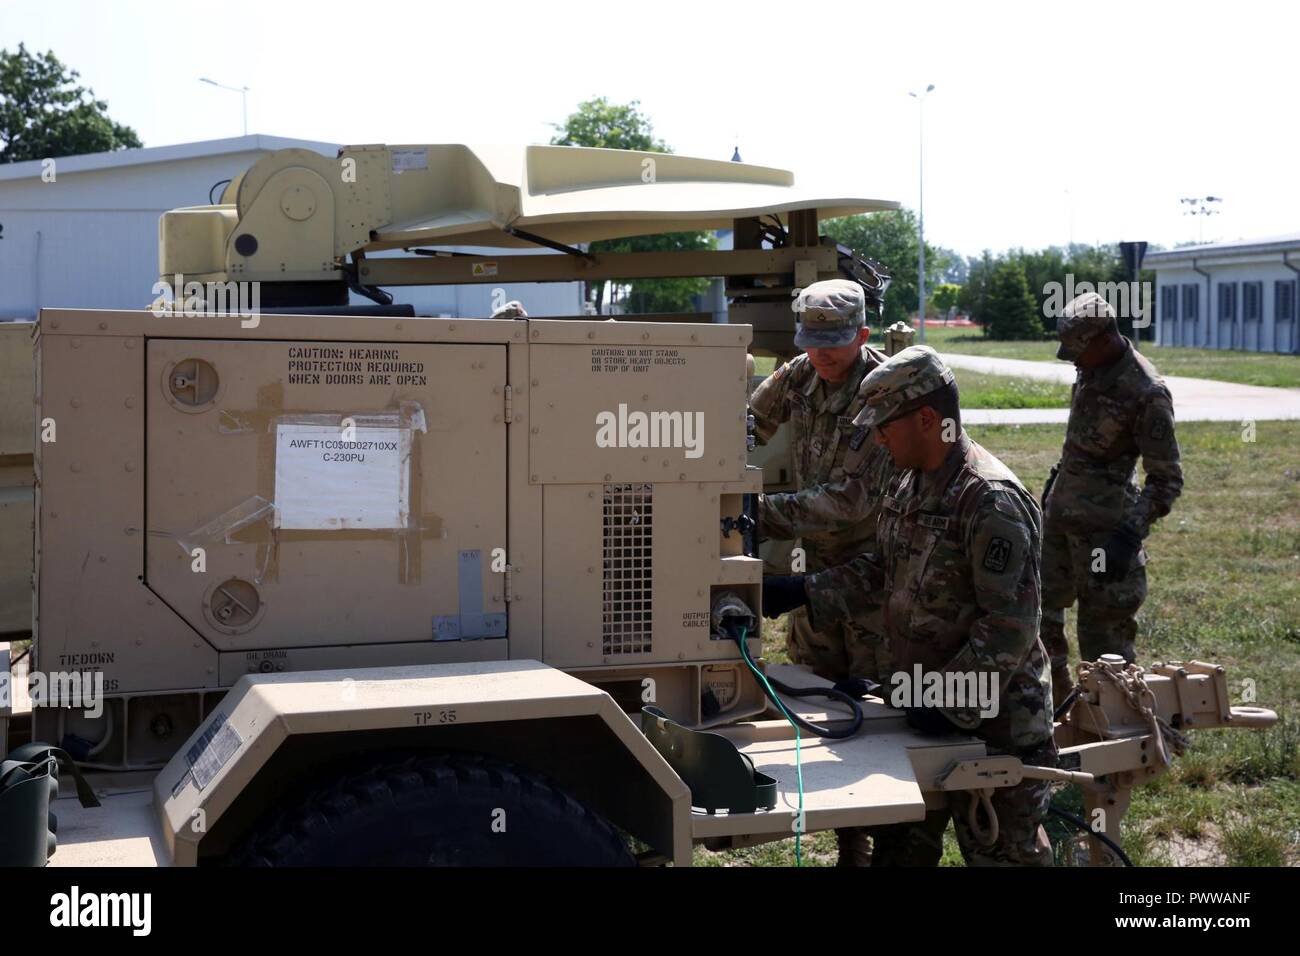 U.S. Army Soldiers assigned to Charlie Company, 86th Expeditionary Signal Battalion, 11th Signal Brigade, set up a generator and Satellite Transportable Terminal June 29, 2017 at Mihail Kogalniceanu Air Base, Romania. The 86th Expeditionary Signal Bn. from Fort Bliss, Texas is augmenting 2nd Theater Signal Brigade with additional tactical signal assets and capability for exercise Saber Guardian 17, a U.S. Army Europe-led, multinational exercise, taking place in Bulgaria, Hungary and Romania July 11-20, 2017. Stock Photo